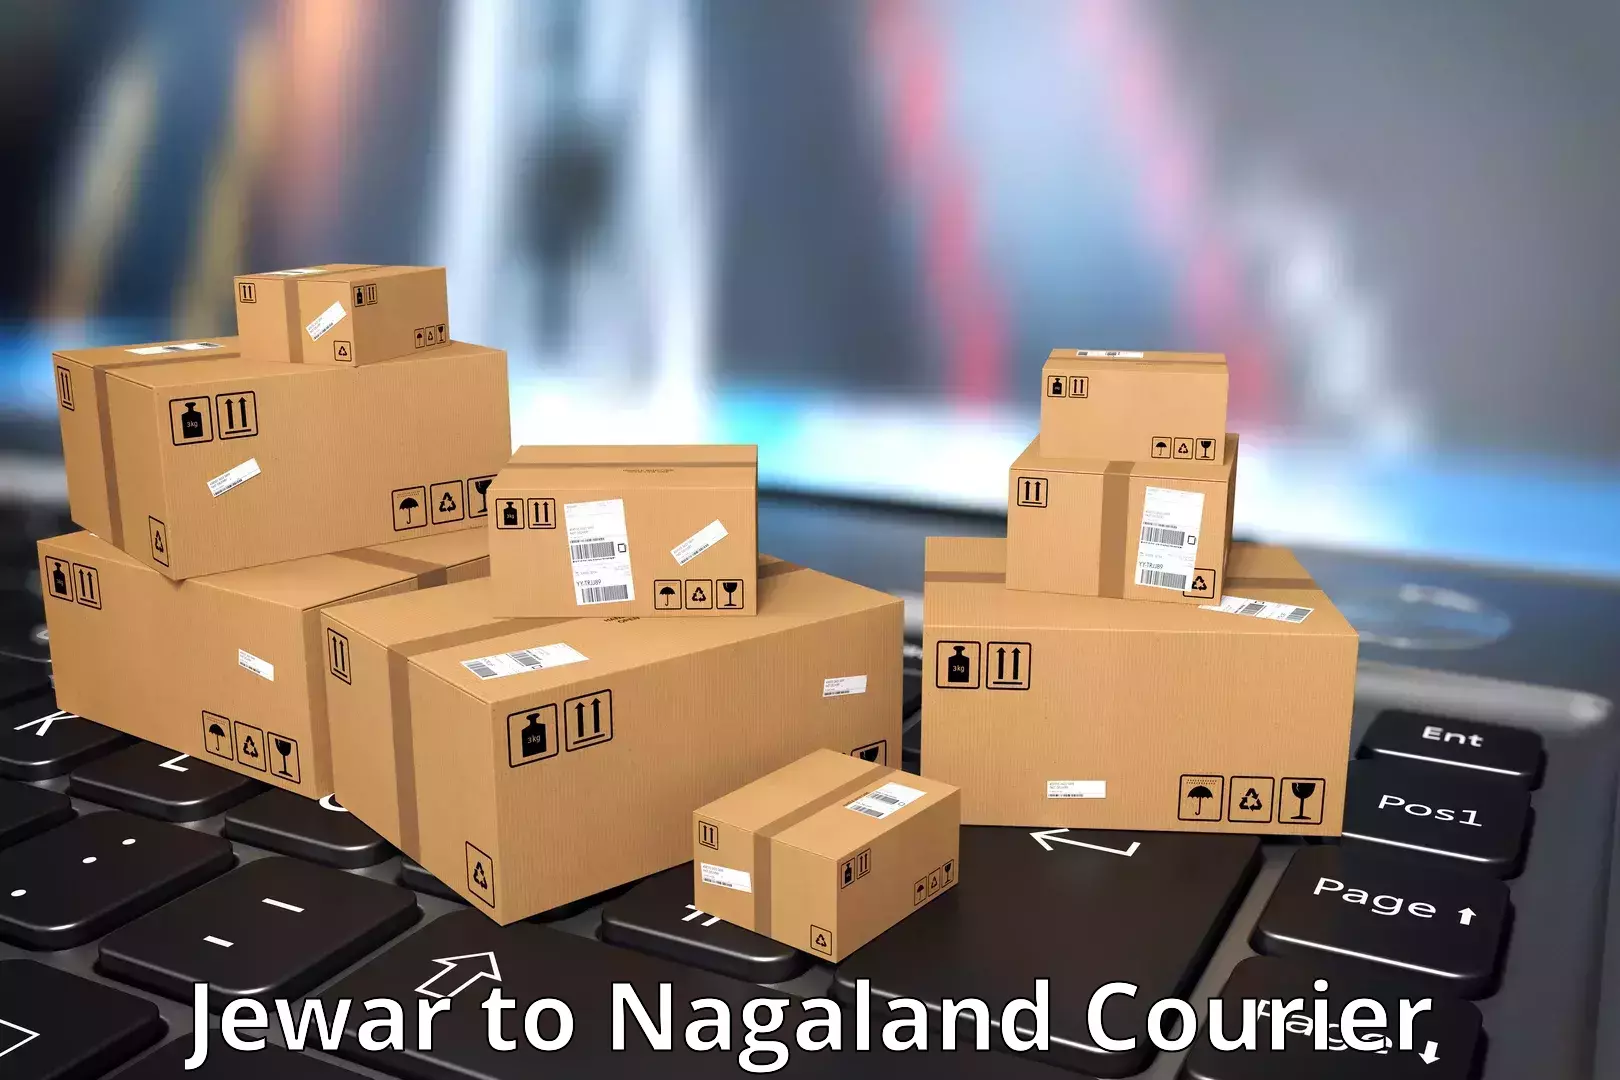 Business delivery service Jewar to Nagaland